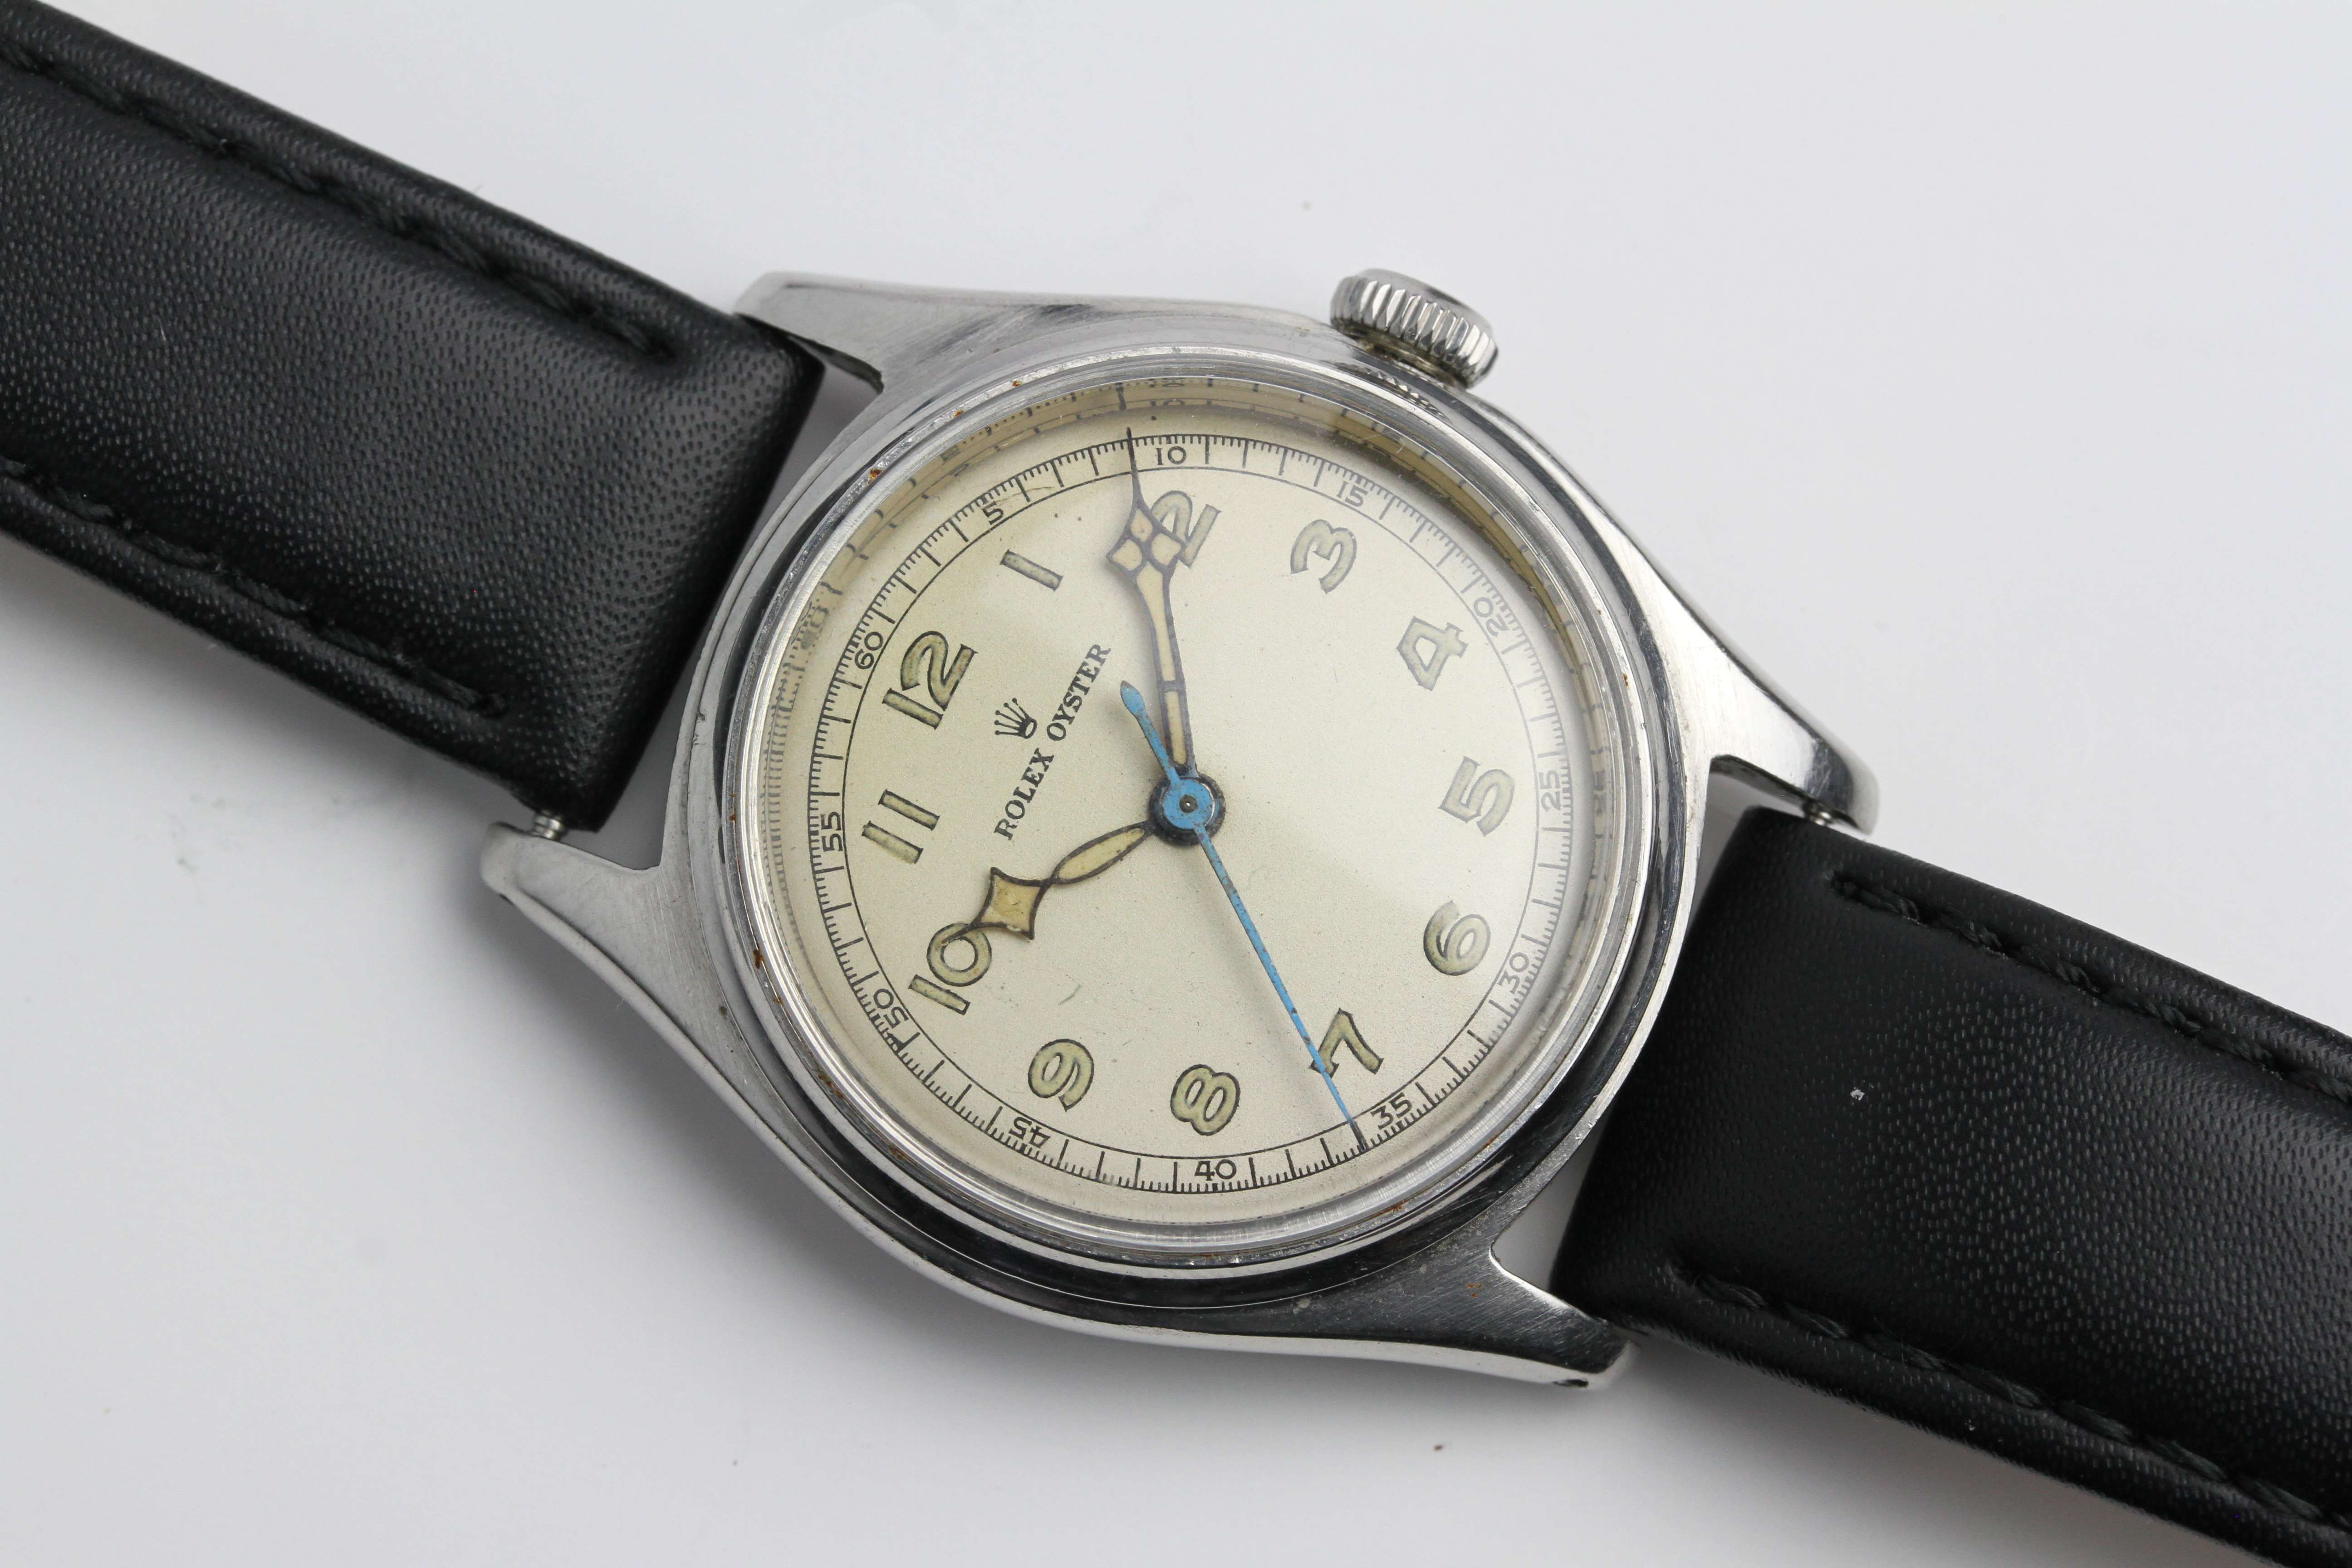 VINTAGE ROLEX OYSTER REFERENCE 4444 CIRCA 1958/59, patina cream dial, Arabic numerals, fancy - Image 2 of 7